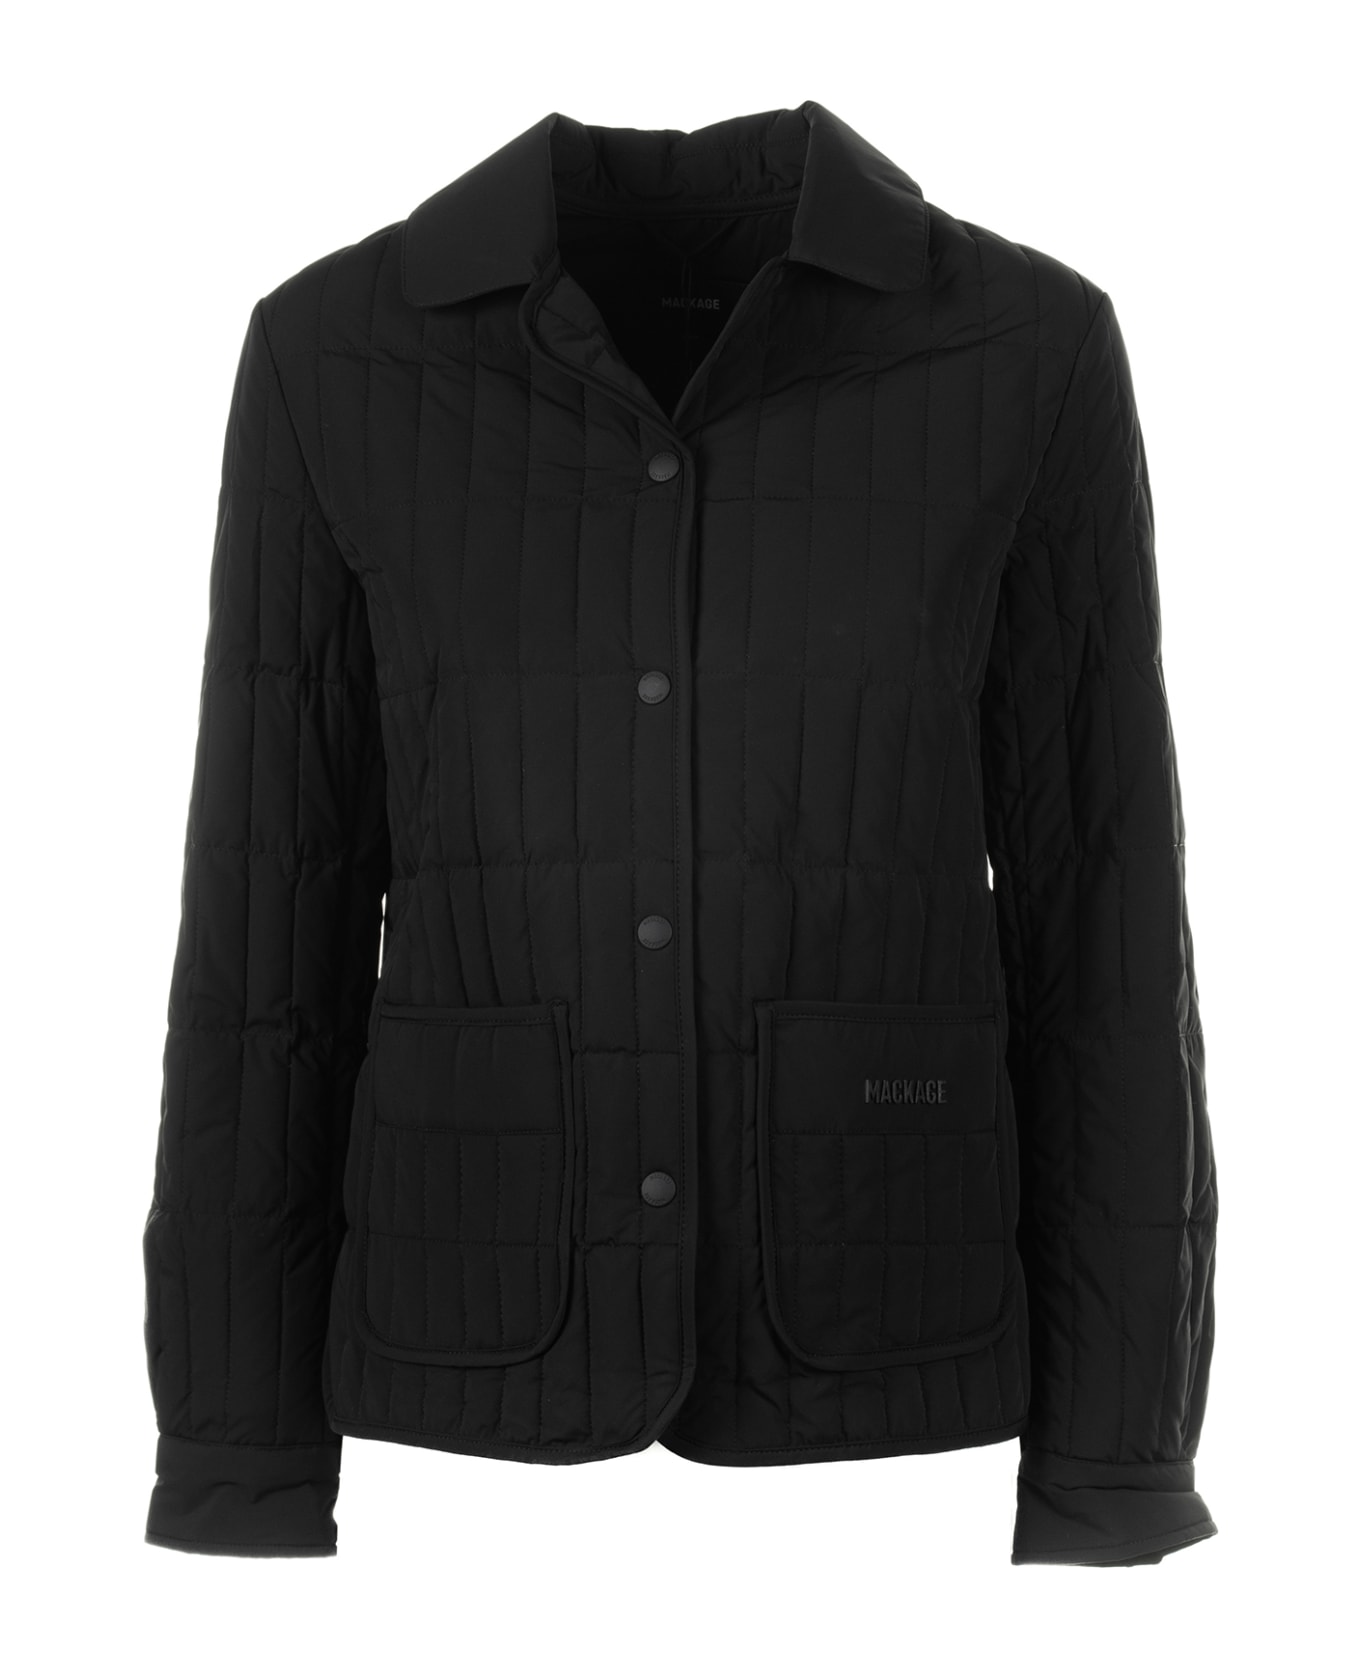 Mackage Sian Vertical Quilted Jacket With Open Collar - NERO ジャケット